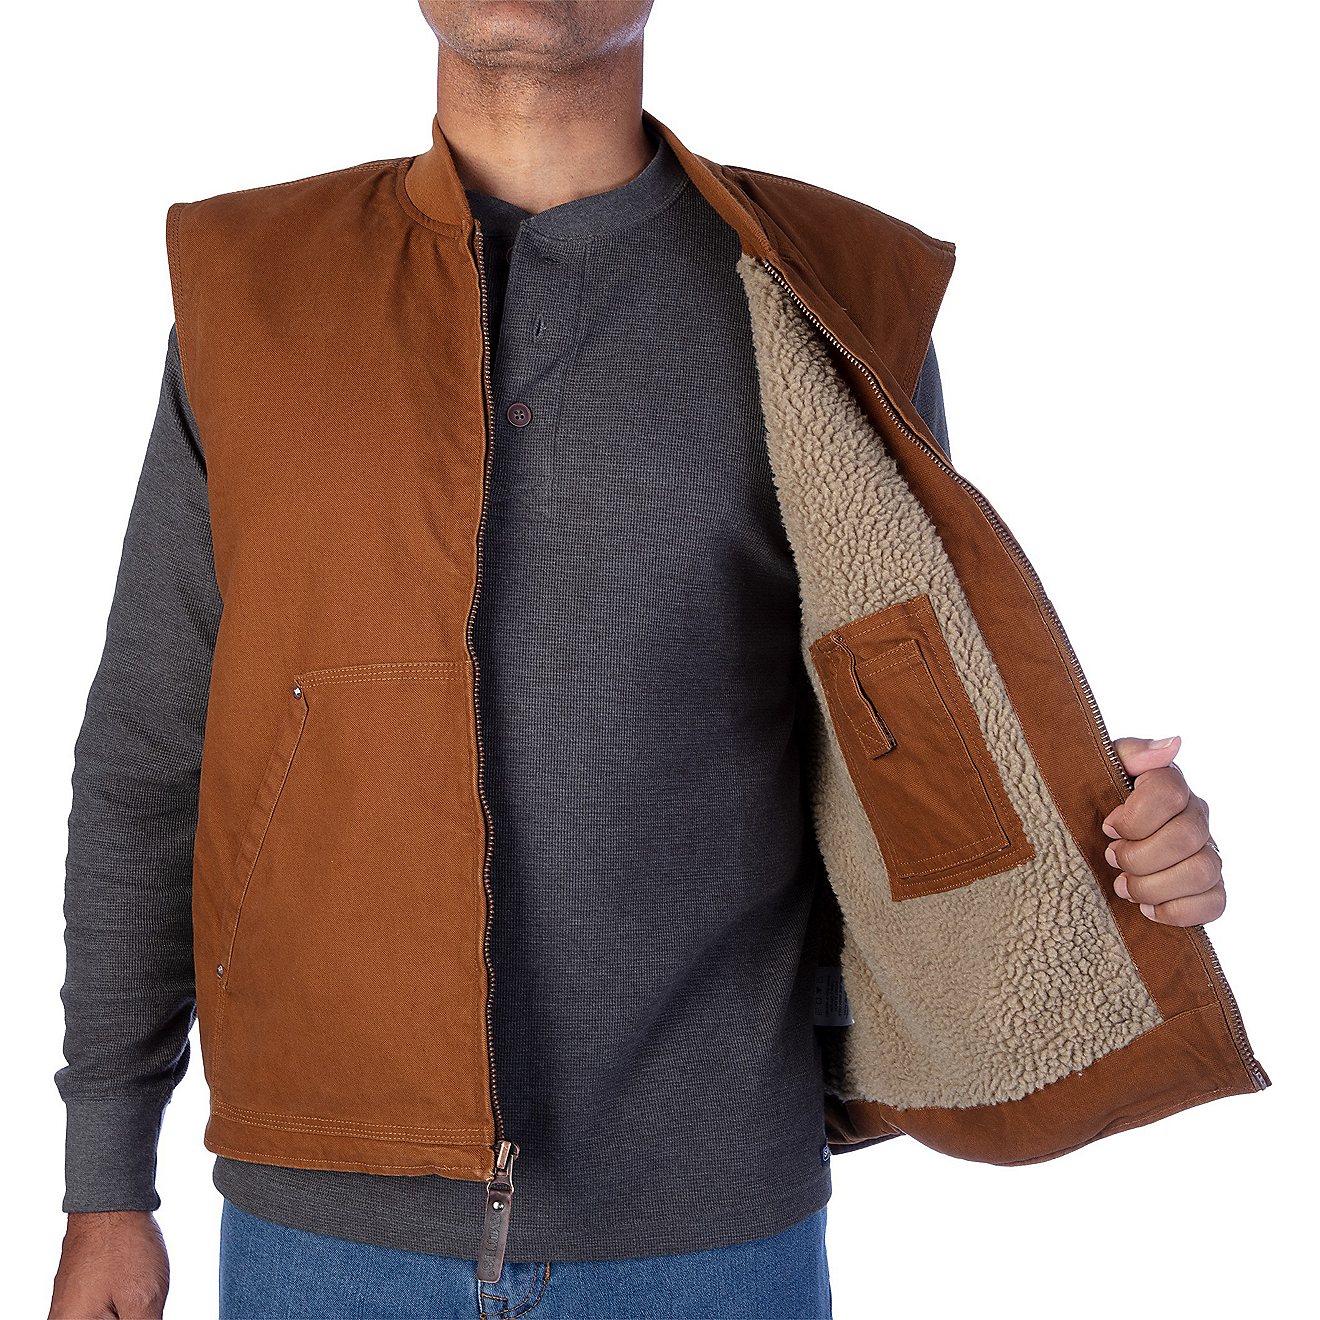 Smiths Workwear Mens Sherpa Lined Duck Canvas Vest Work Utility Outerwear